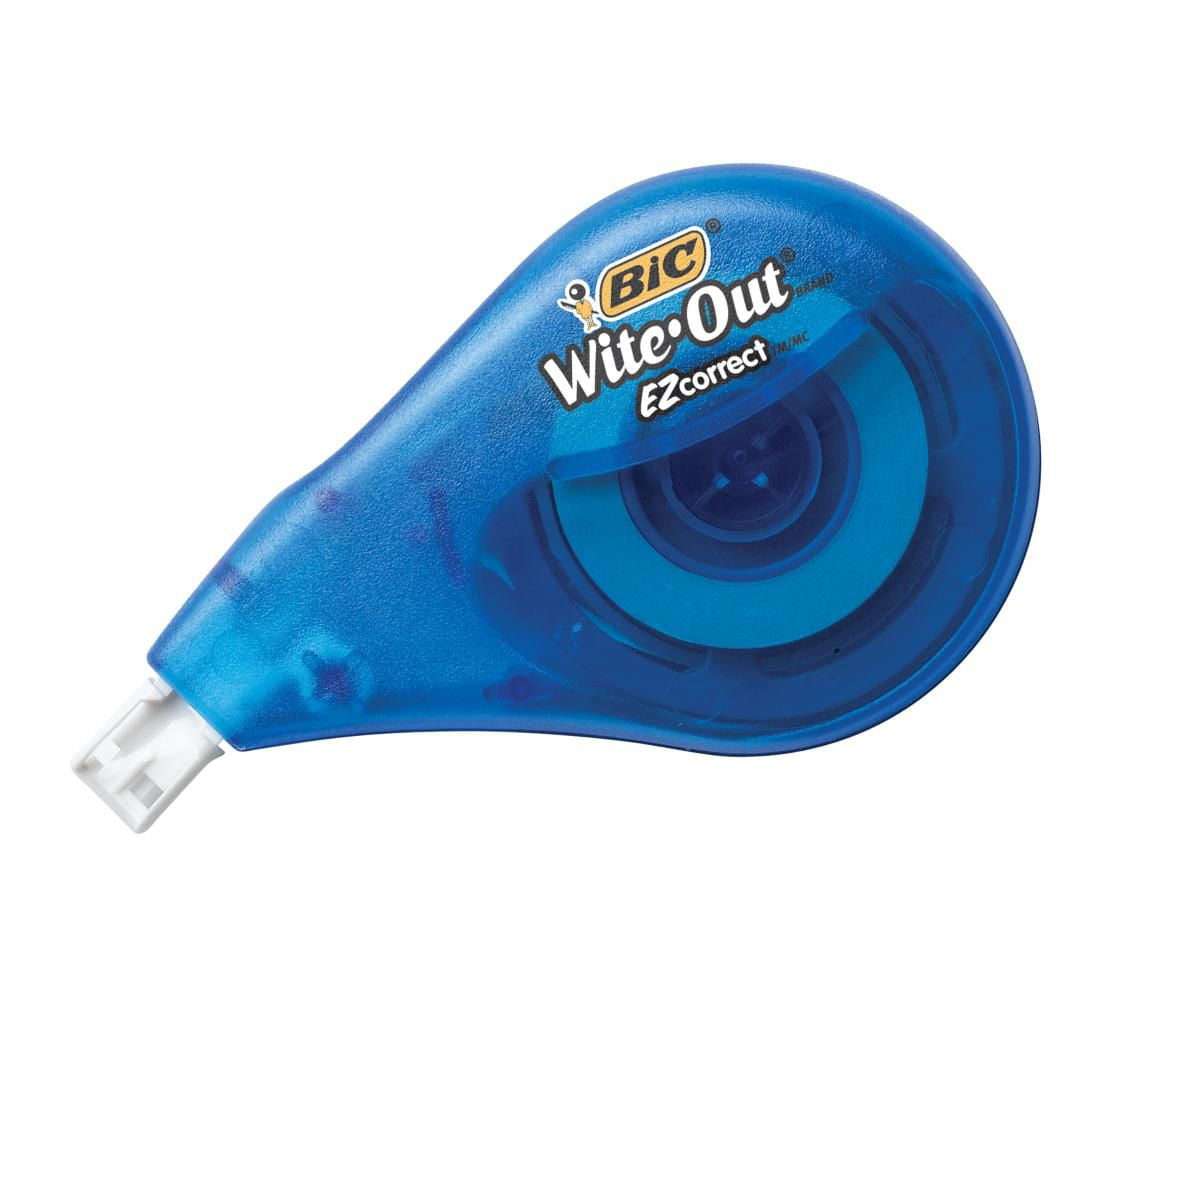 BIC Write-Out Correction Tape 4mmx12m  Shop online at NXP for business  supplies. Wide range of office, kitchen, furniture and cleaning products.  Fast delivery, great customer service, 100% Kiwi owned.